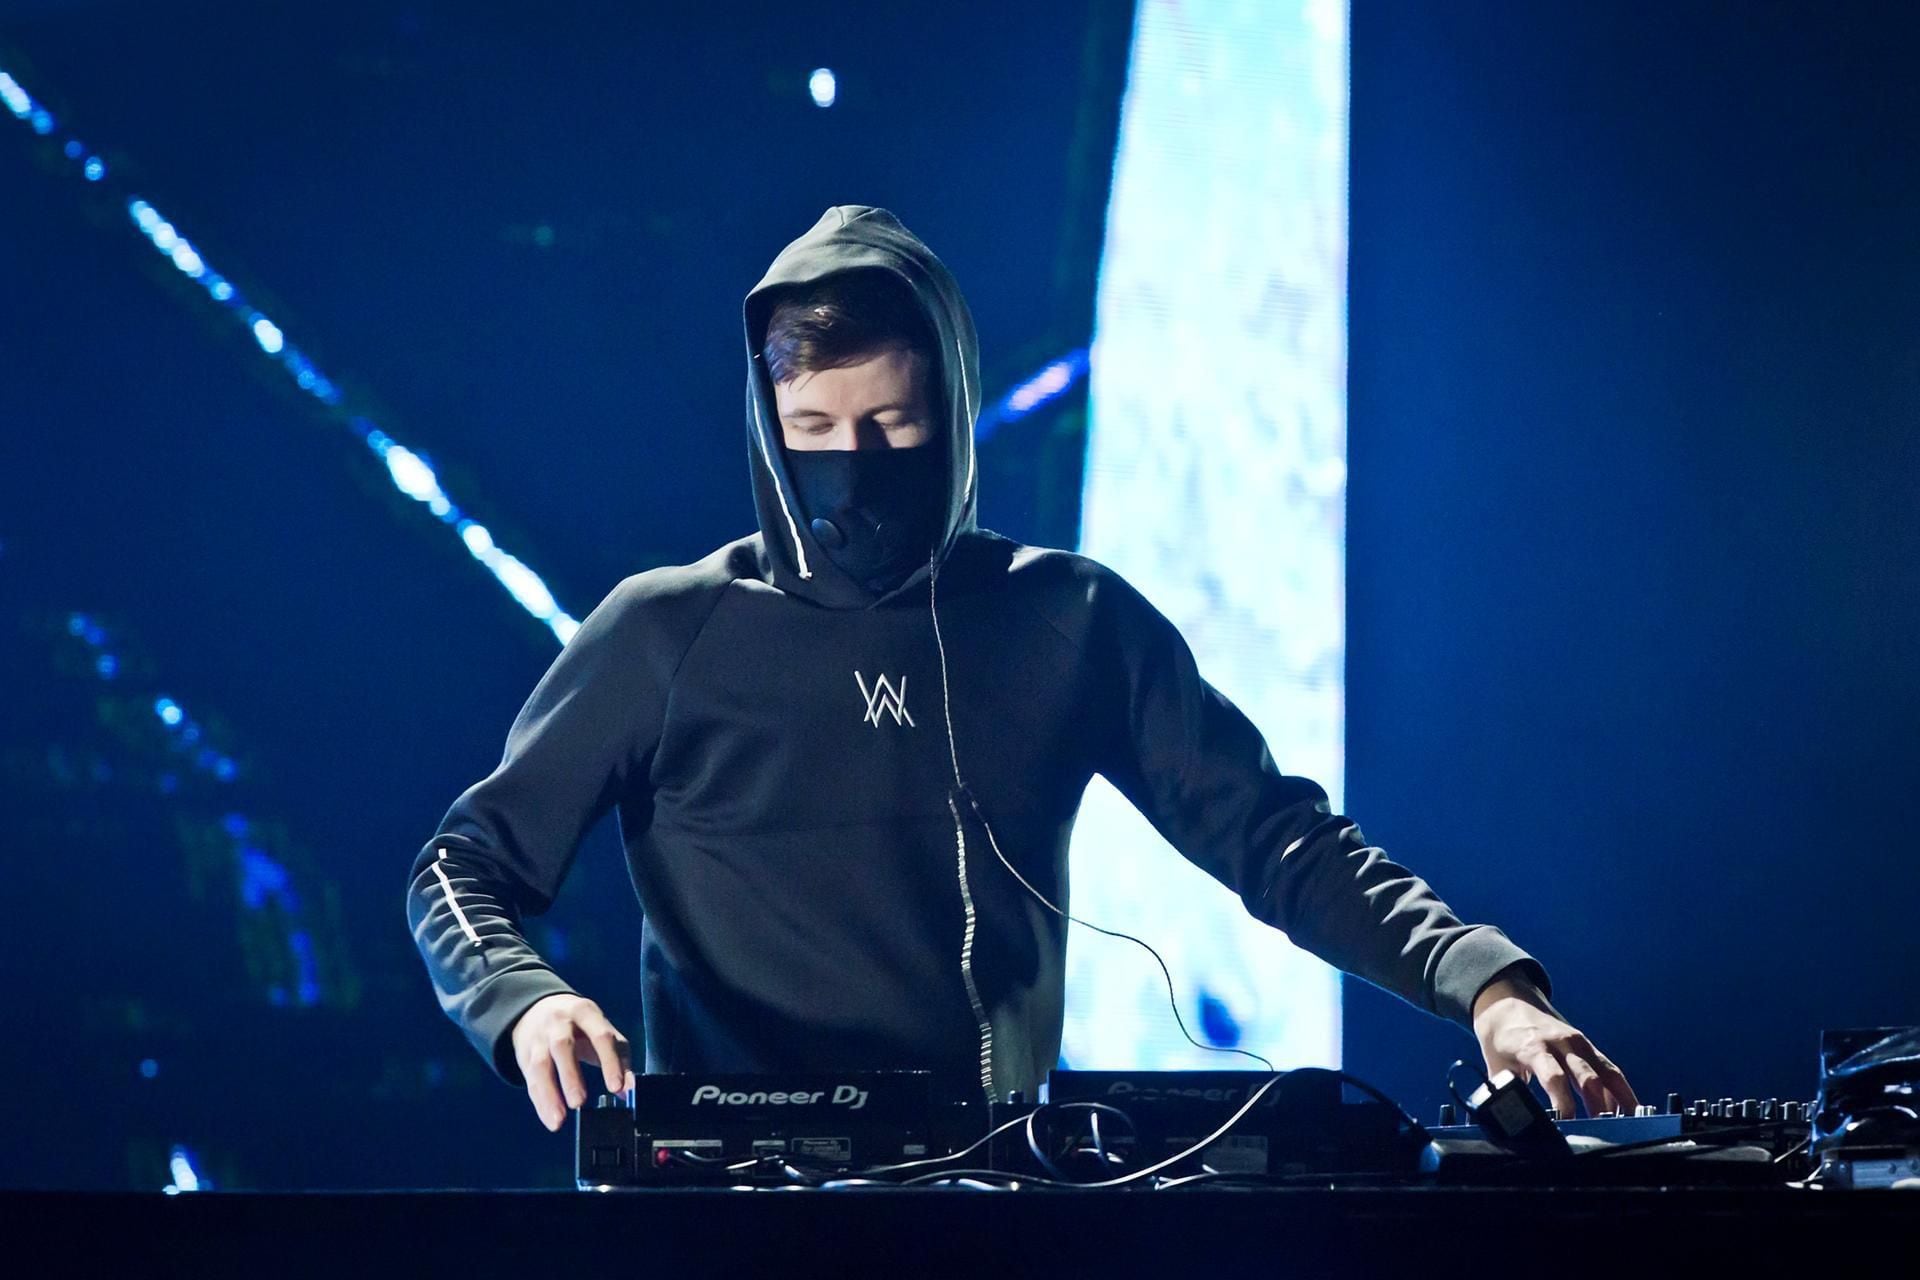 DJ Alan Walker on remixing Hans Zimmer's song from 'Inception' 'It's a